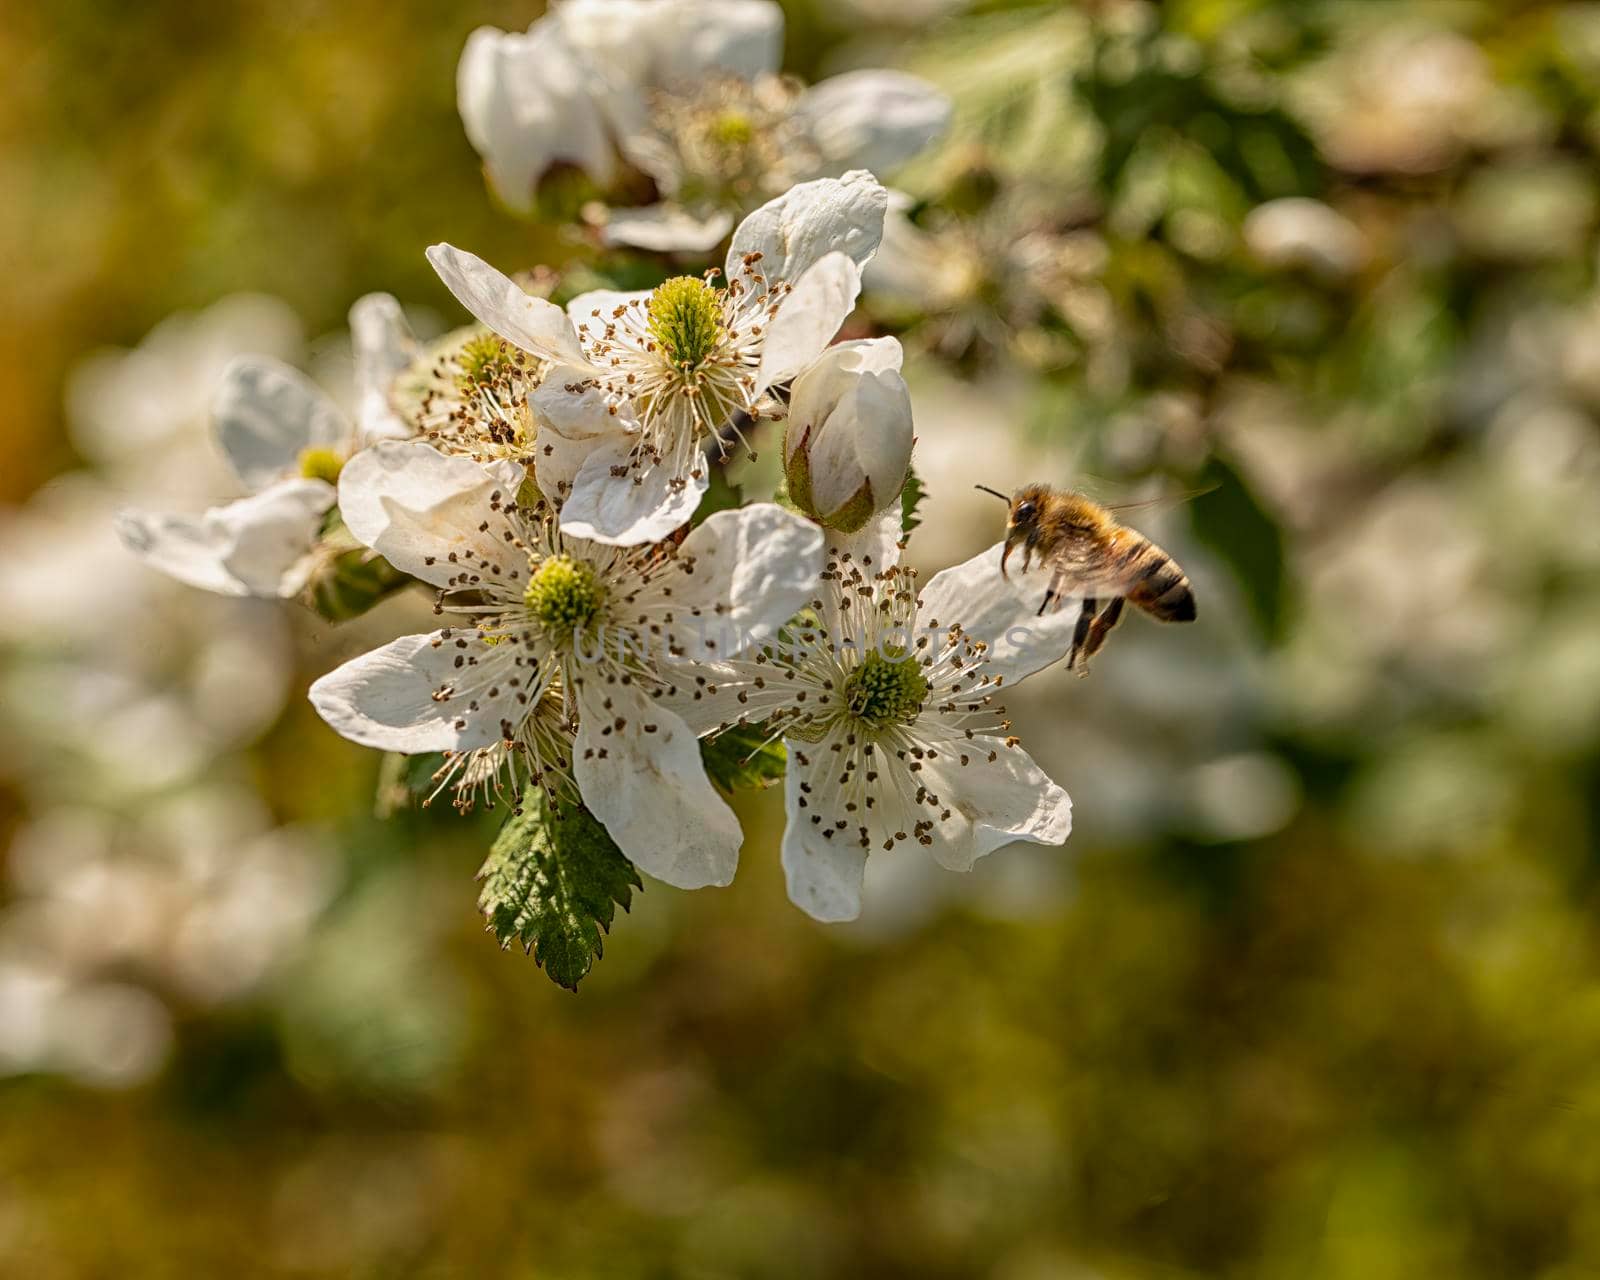 Bee hovers near a white bloom on a bush.